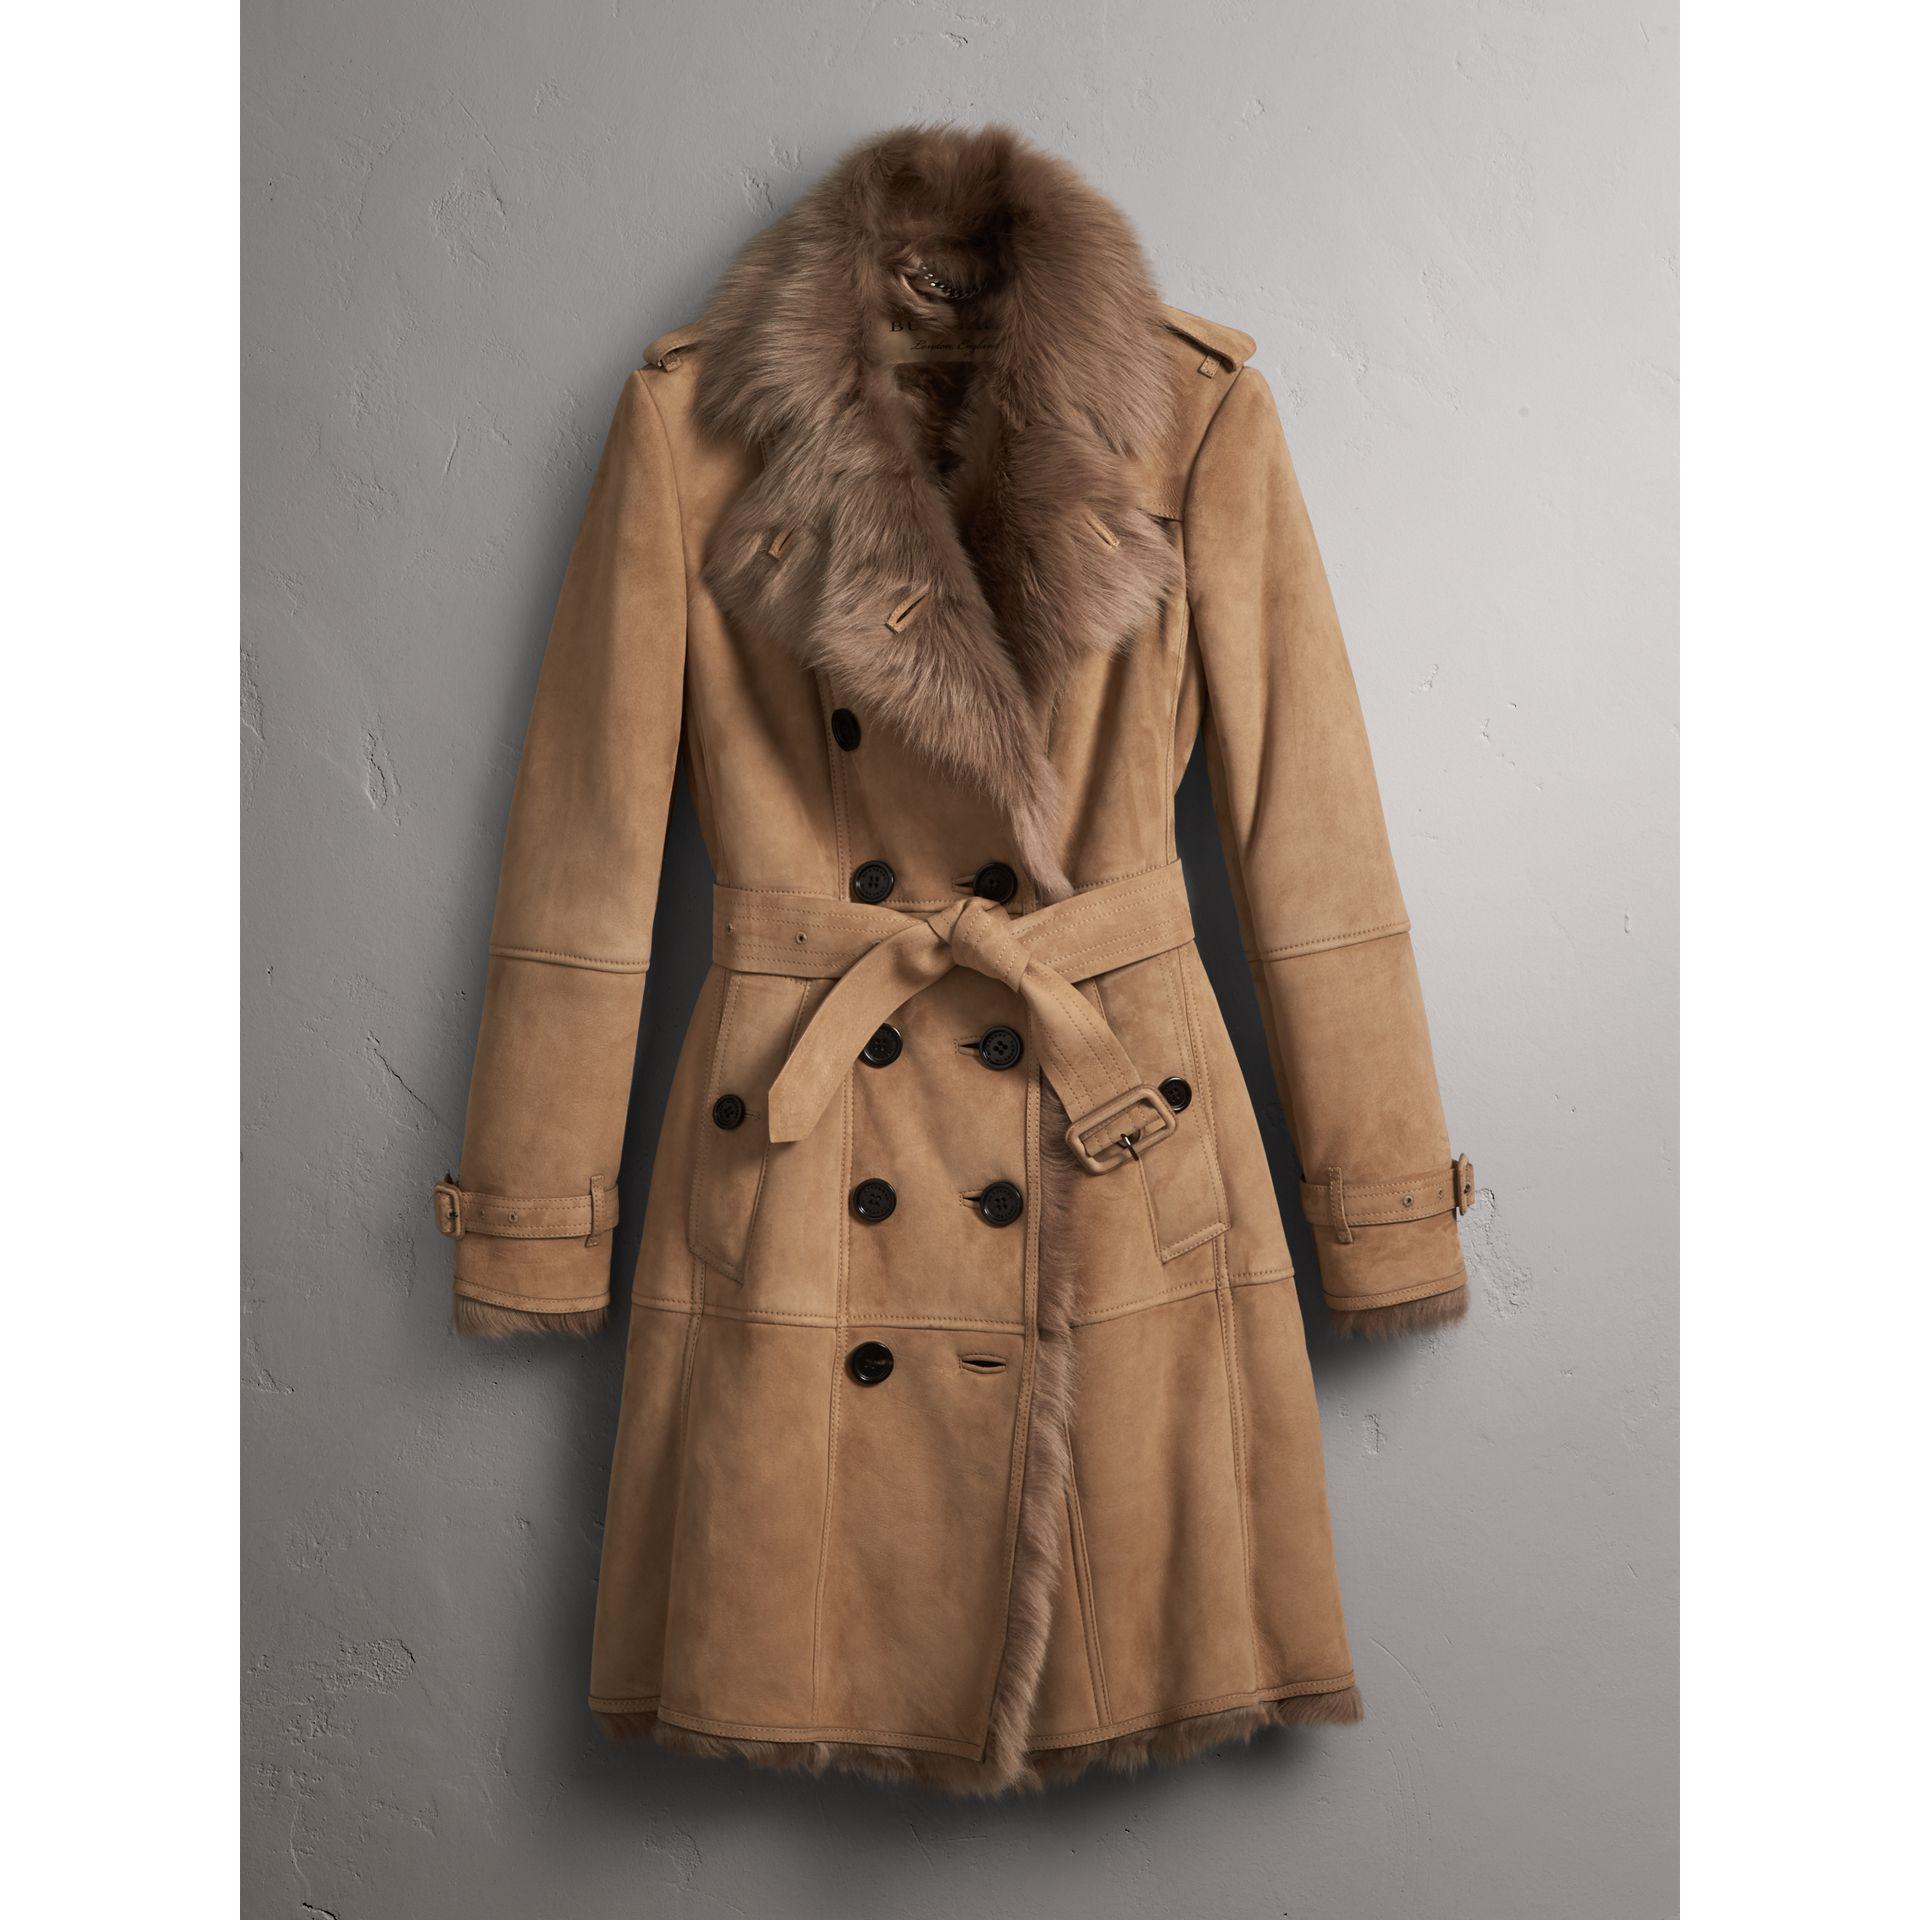 Burberry Fur Shearling Trench Coat Camel - Lyst